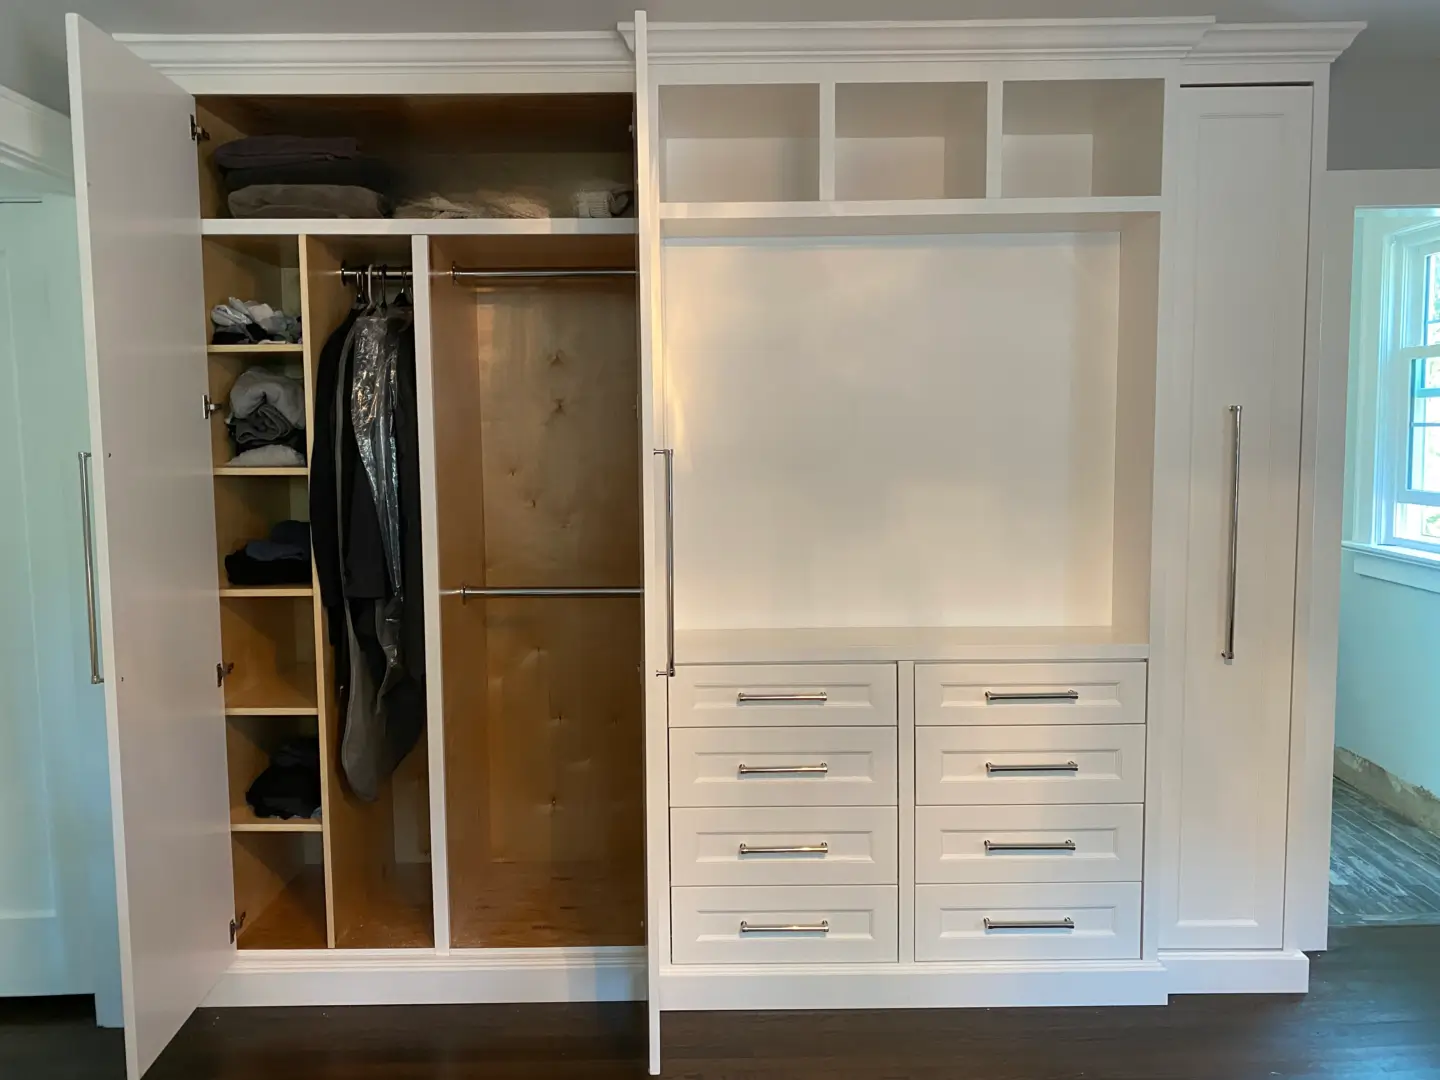 A White Color Closet Space With a Rod For Hanging